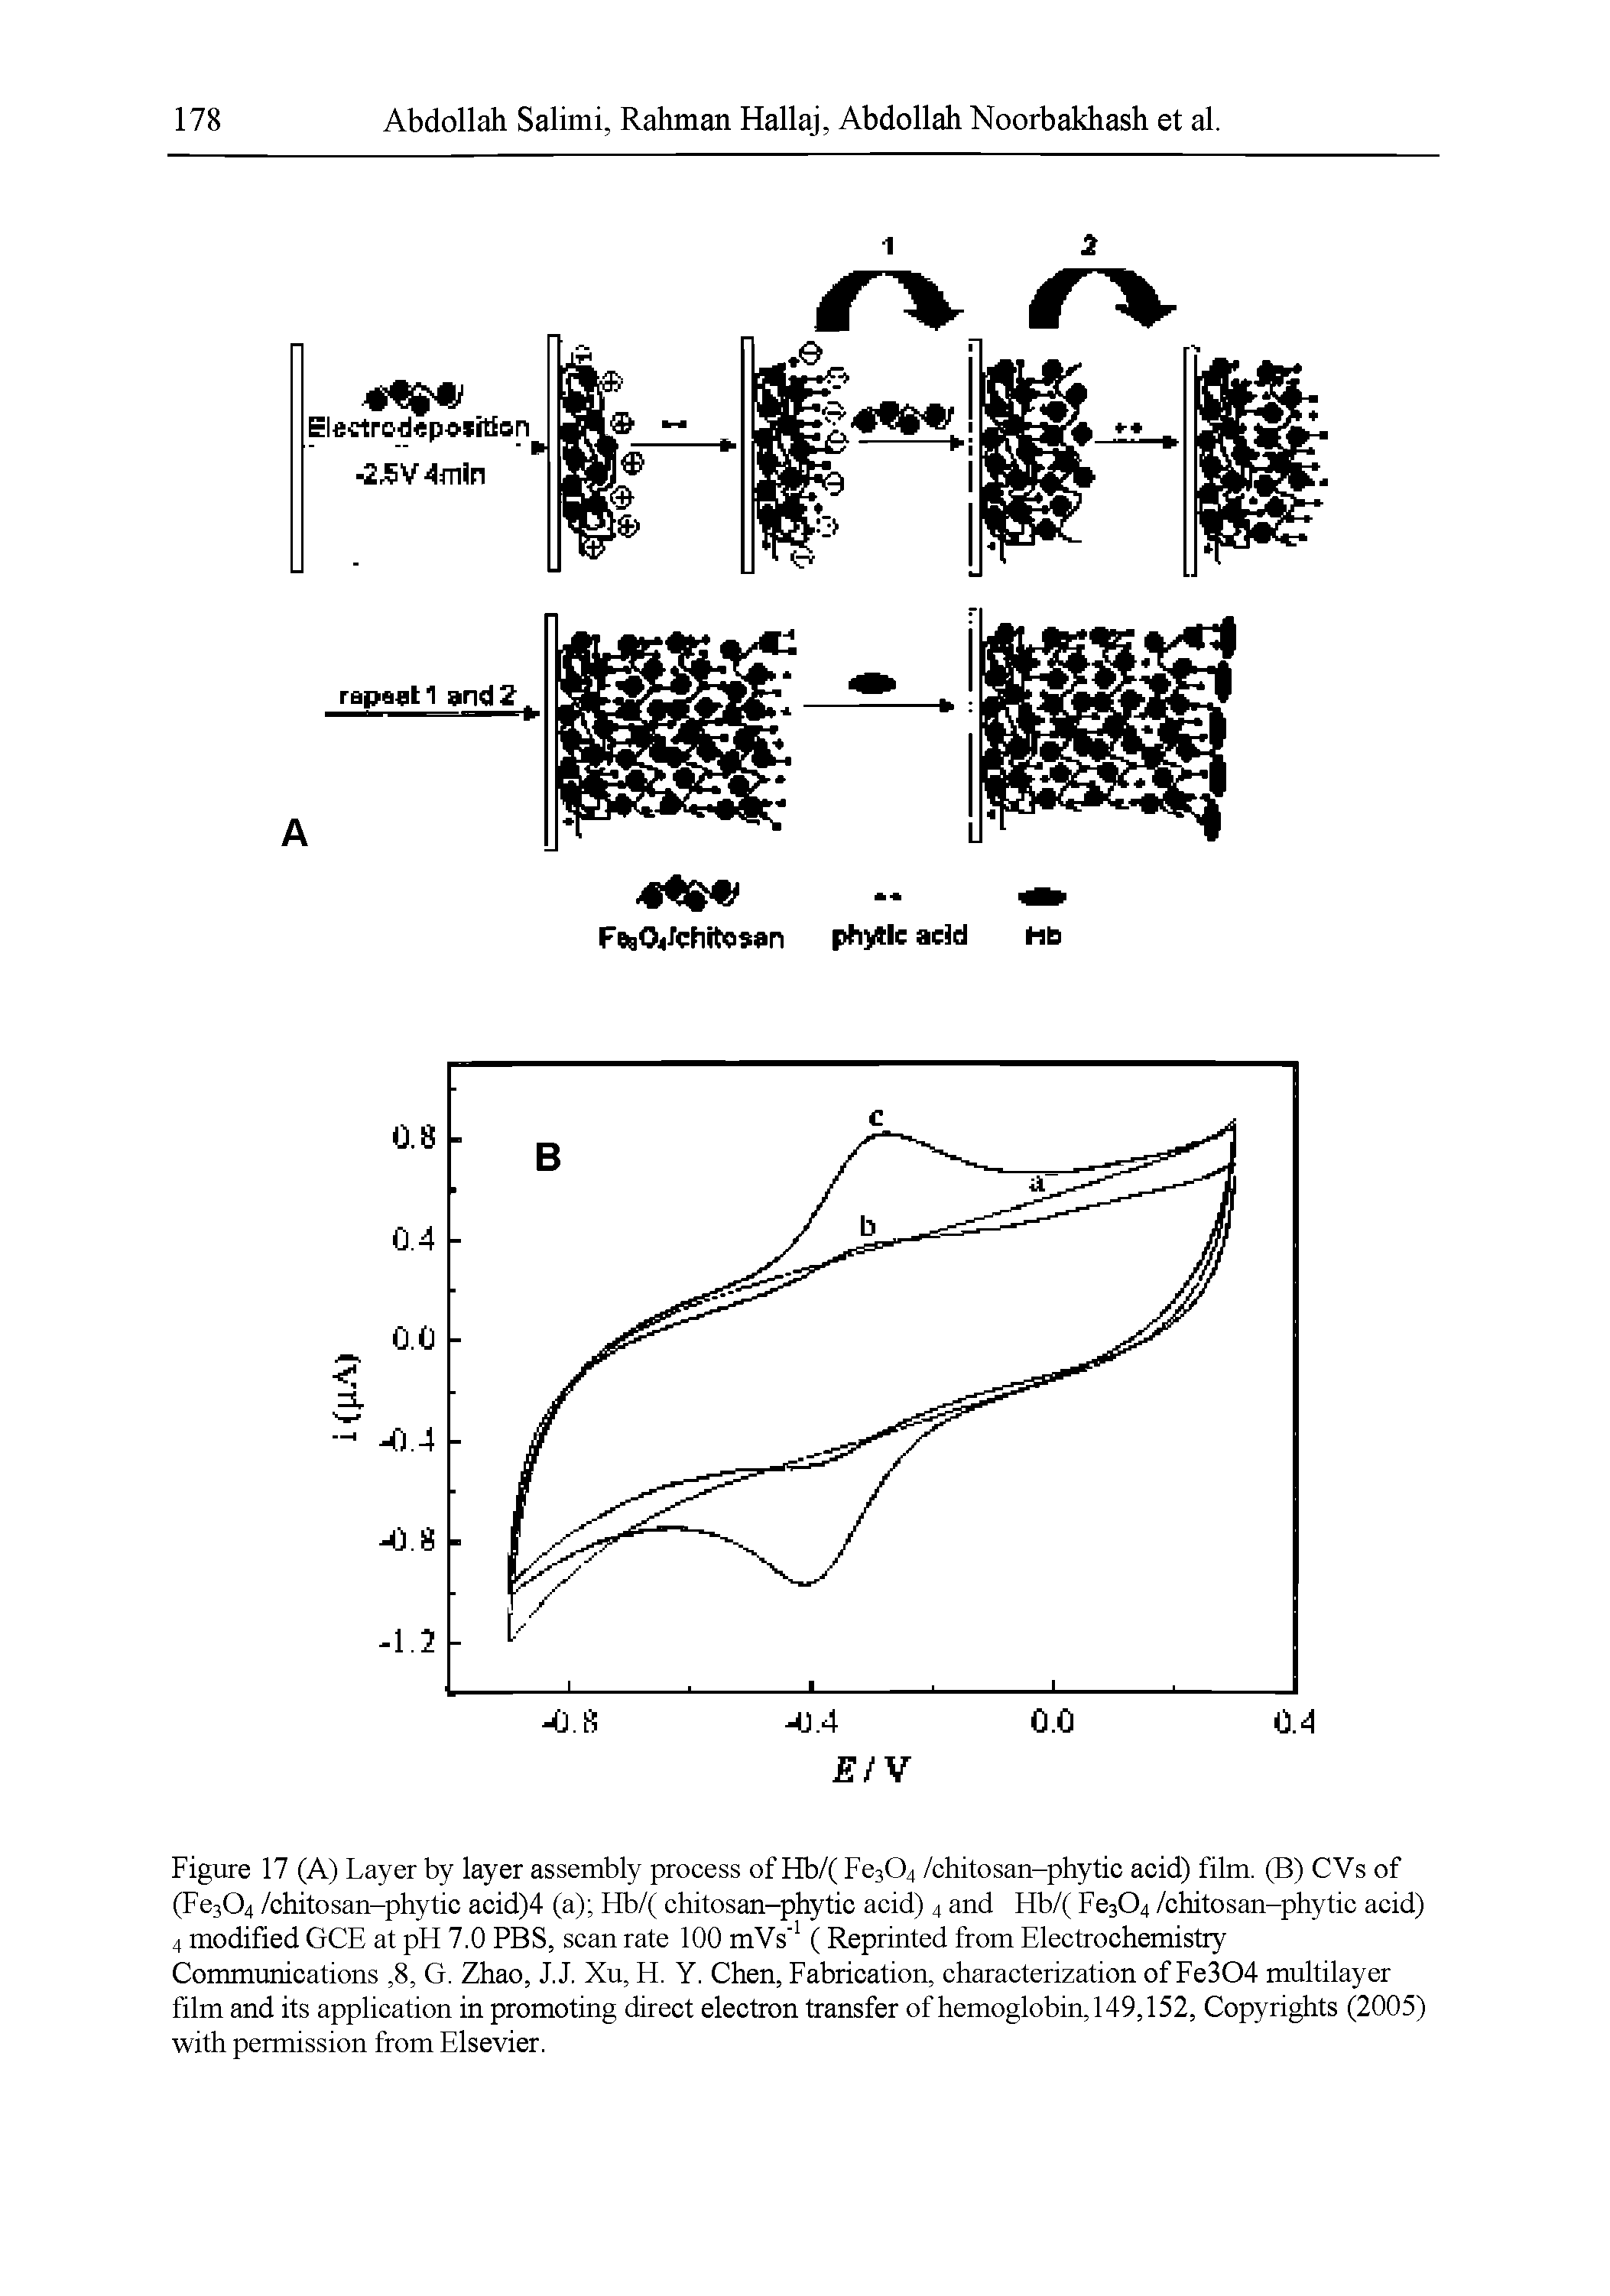 Figure 17 (A) Layer by layer assembly process of Hb/( Fe304 /chitosan-phytic acid) film. (B) CVs of (Fe304 /chitosan-phytic acid)4 (a) Hb/( chitosan-phytic acid) 4 and Hb/( Fe304 /chitosan-phytic acid) 4 modified GCE at pH 7.0 PBS, scan rate 100 mV s 1 (Reprinted from Electrochemistry Communications, 8, G. Zhao, J.J. Xu, H. Y. Chen, Fabrication, characterization of Fe304 multilayer film and its application in promoting direct electron transfer of hemoglobin, 149,152, Copyrights (2005) with permission from Elsevier.